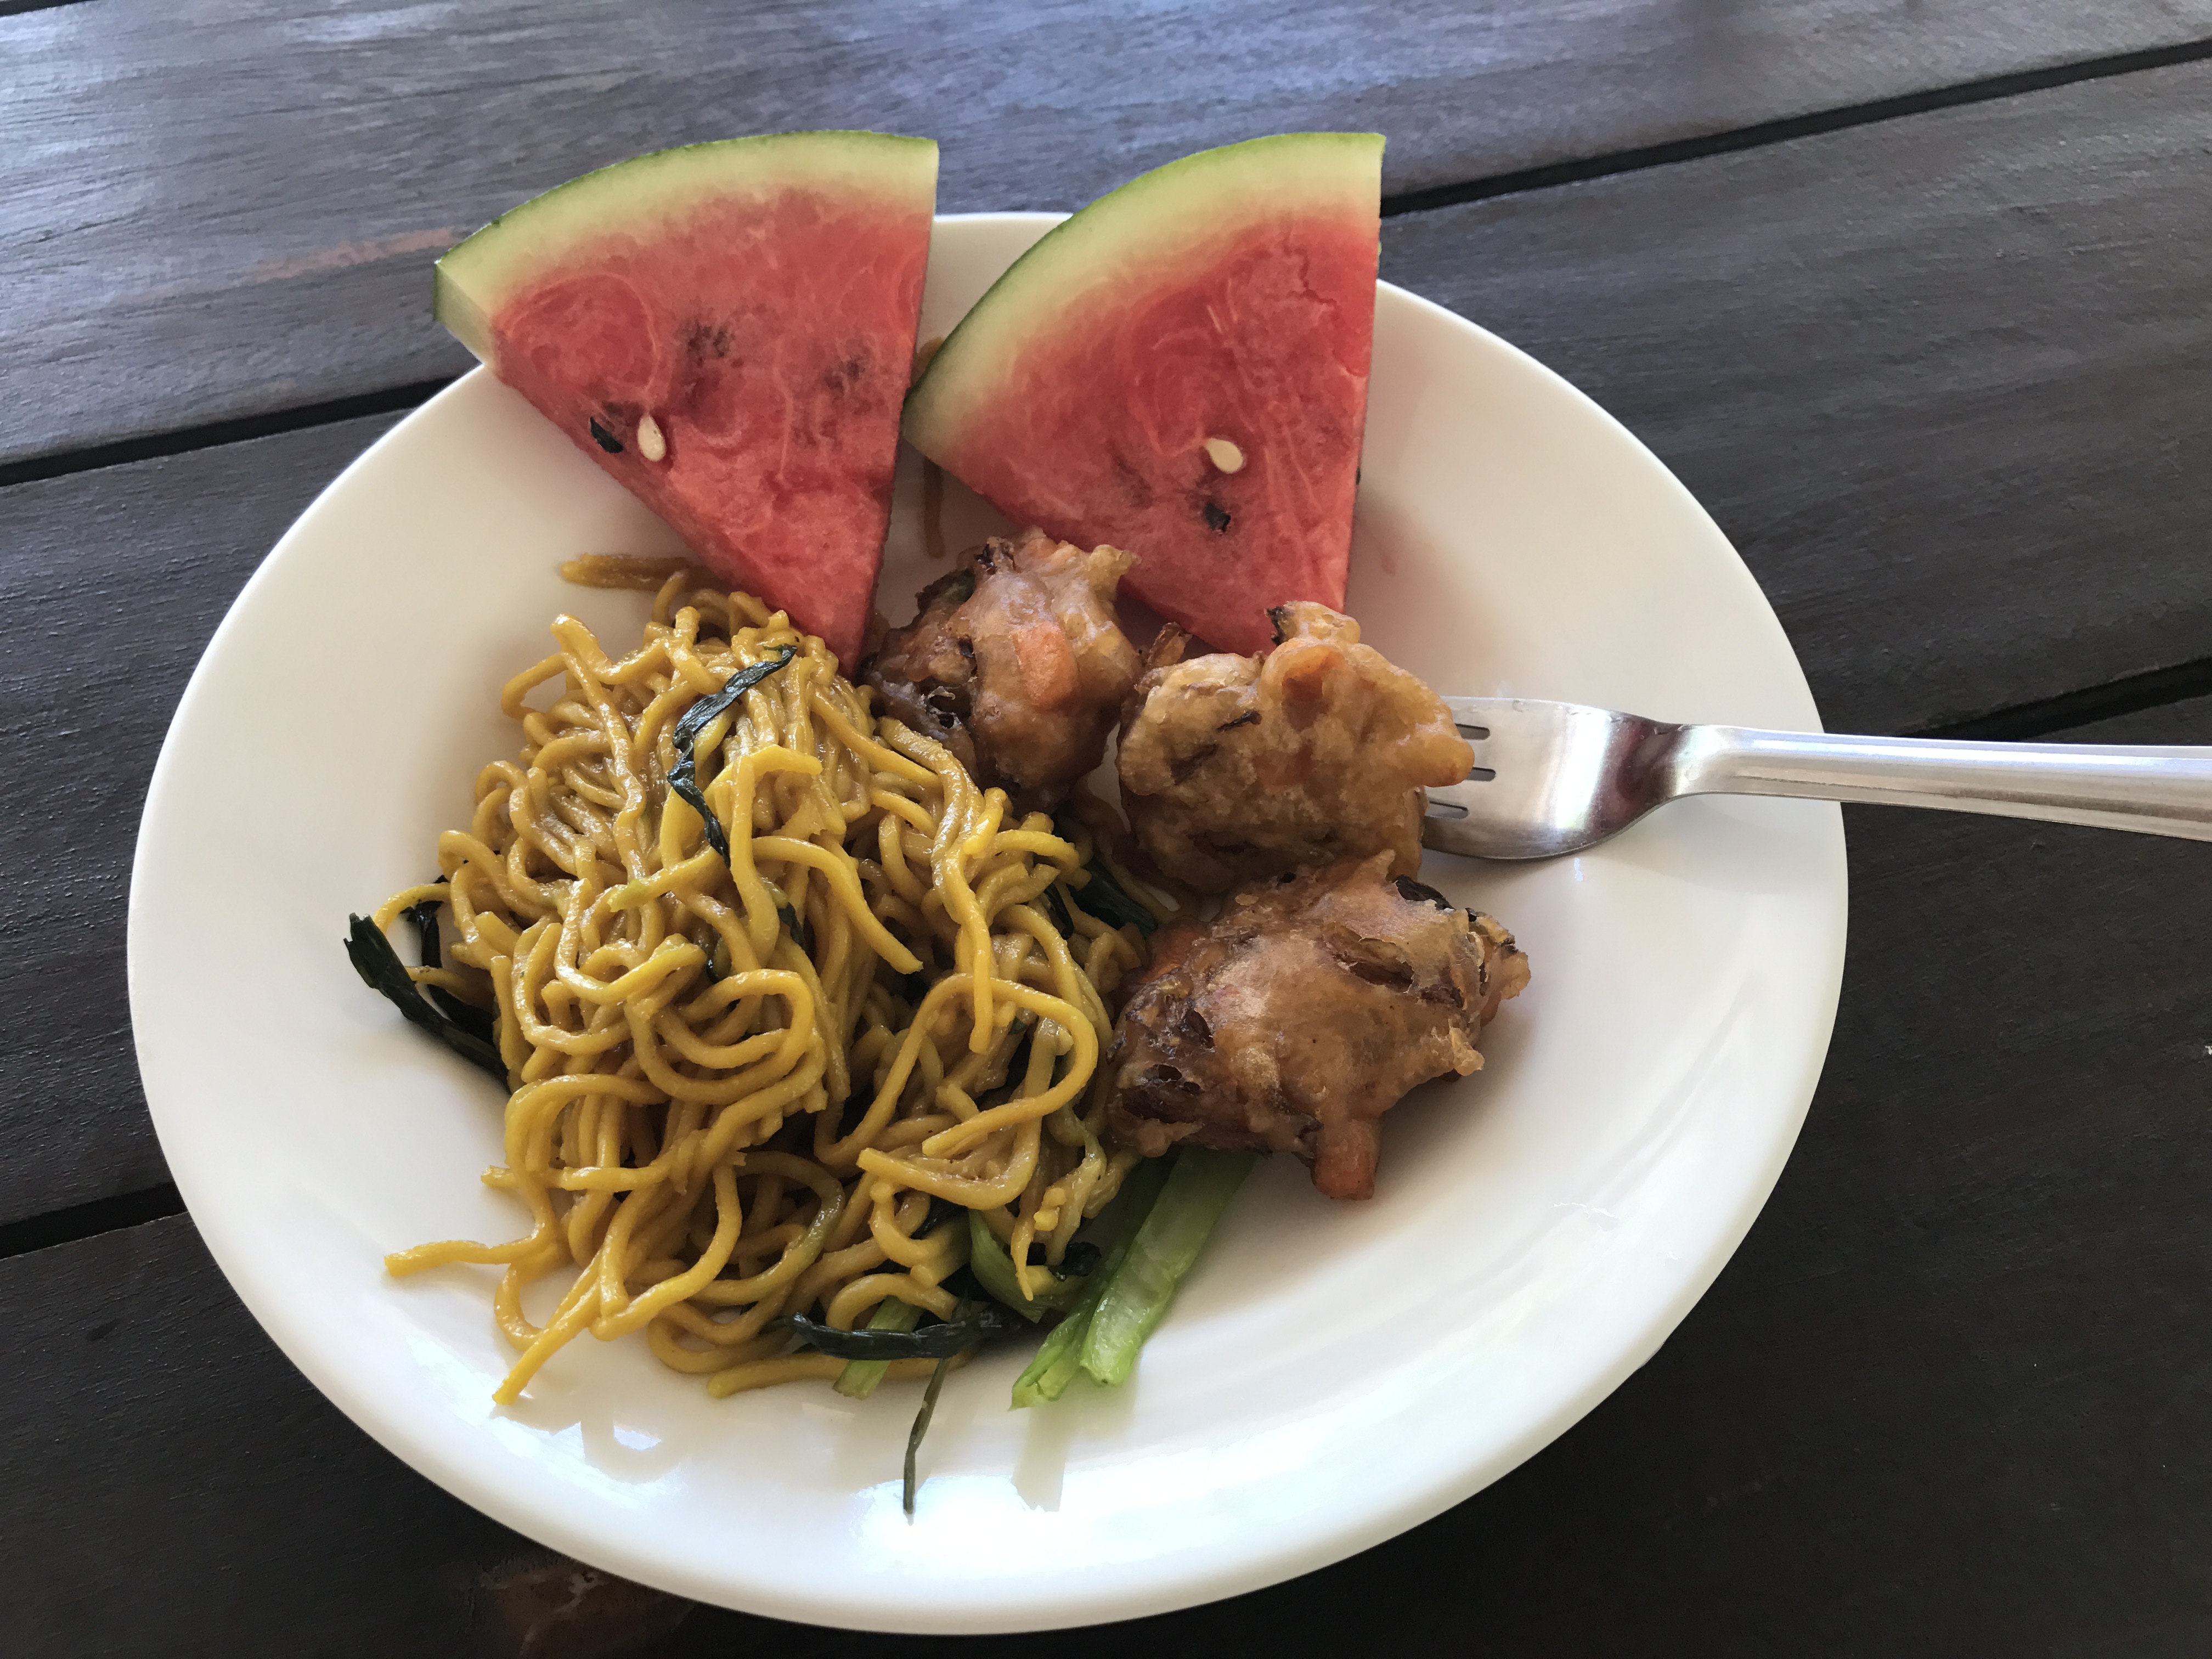 Watermelons and Noodles for Lunch